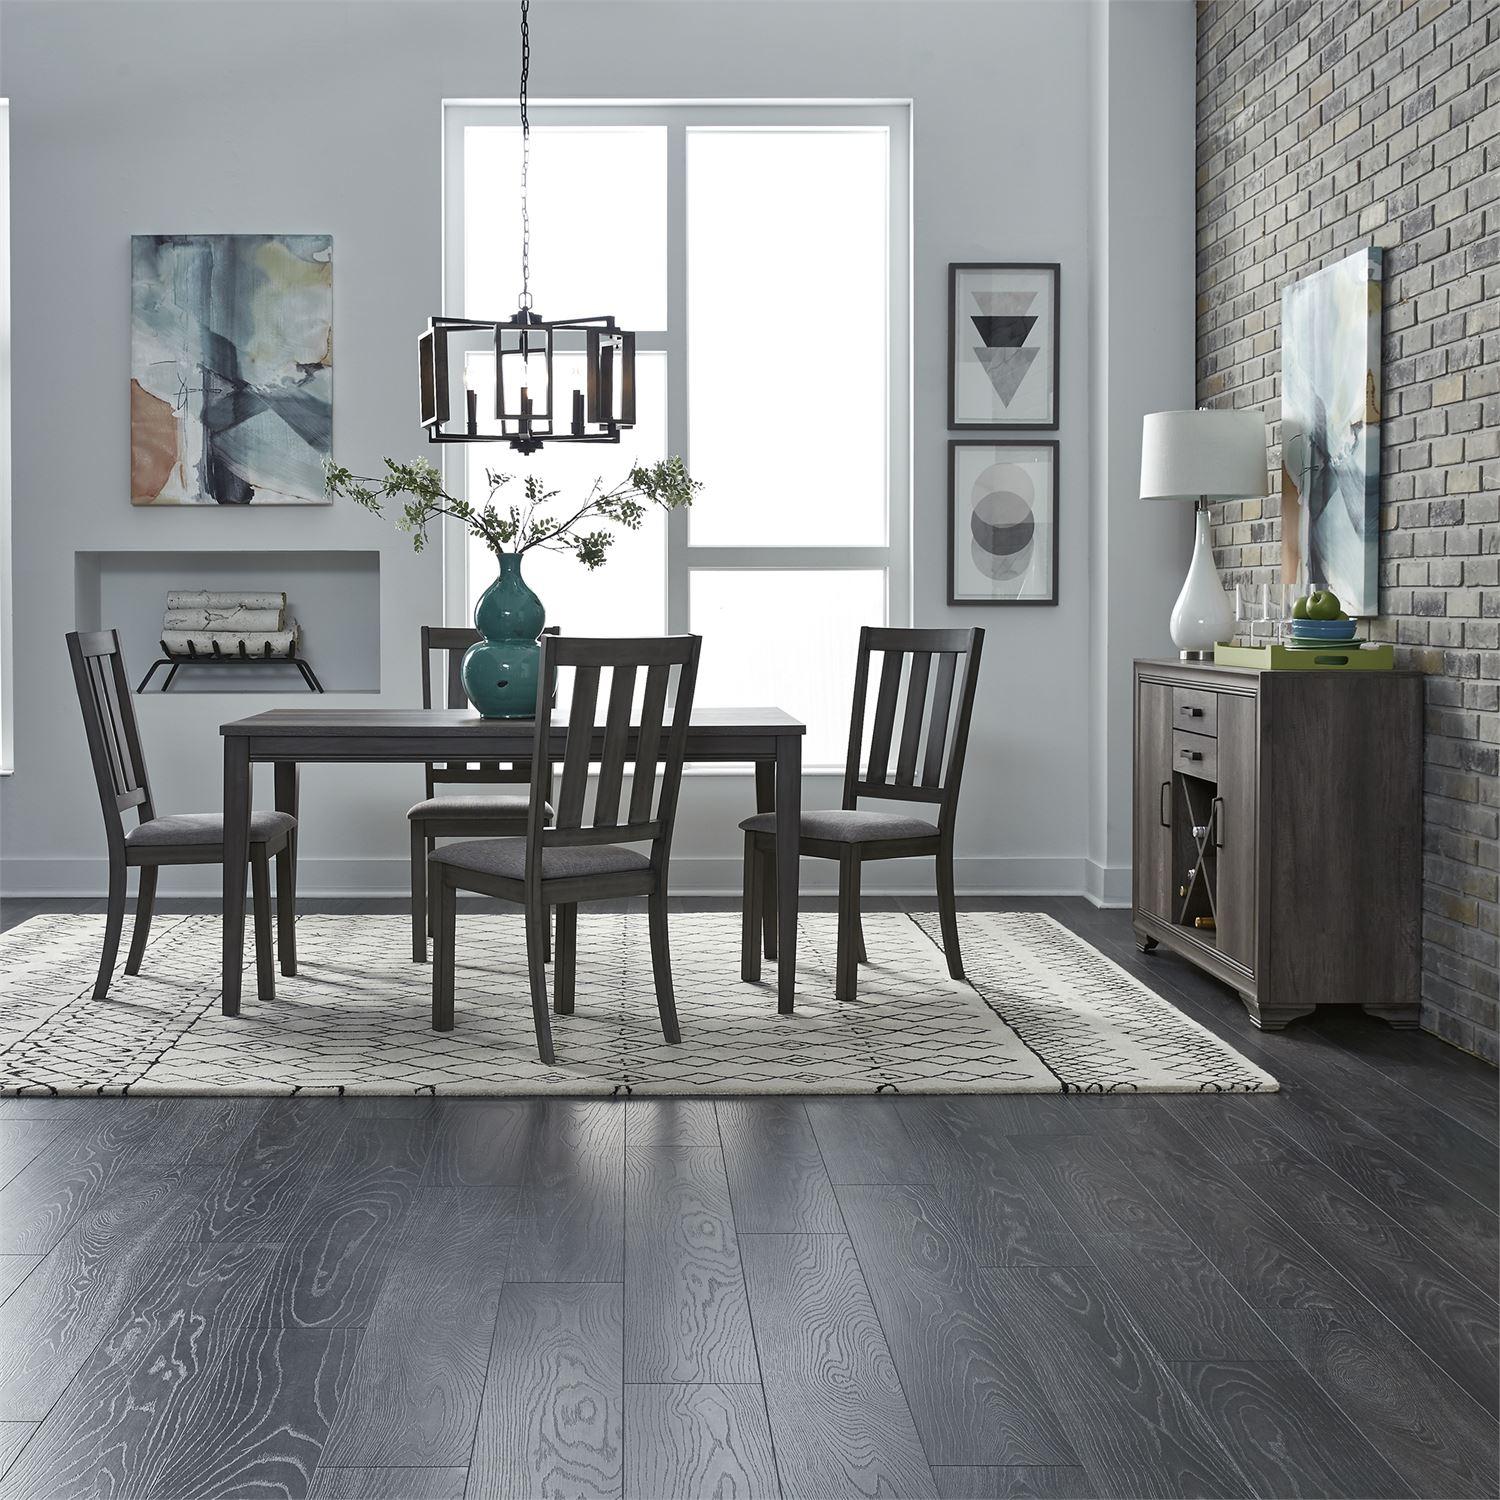 Contemporary Dining Room Set Tanners Creek  (686-CD) Dining Room Set 686-CD-5LTS in Gray Fabric